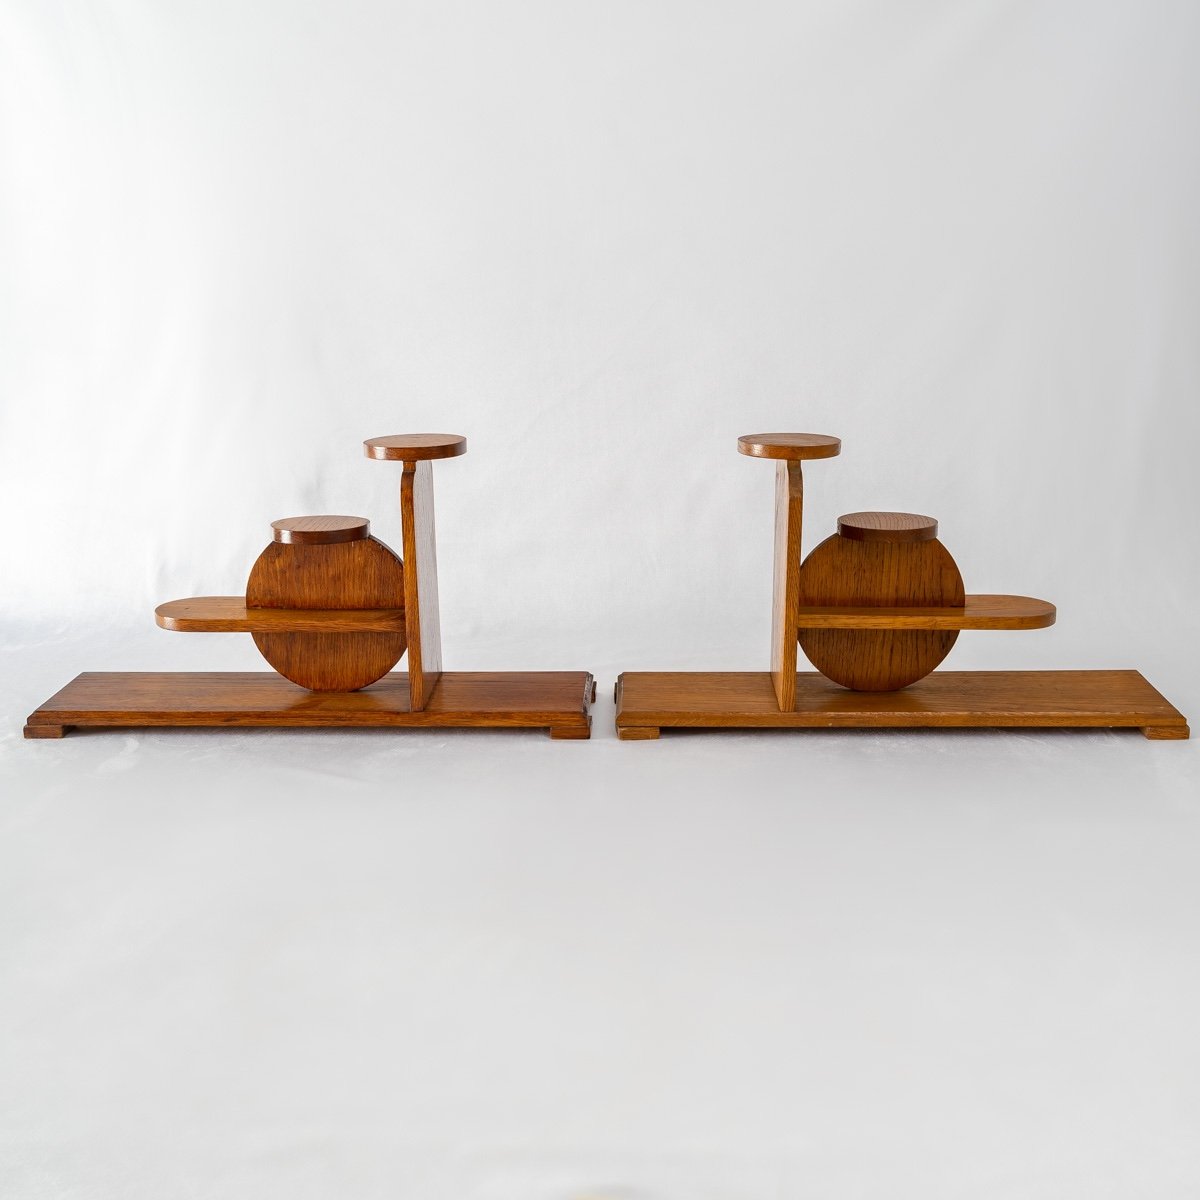 Pair Of Brutalist Shelves - Attributed To Audoux-minet - Varnished Oak - XXth Century-photo-2